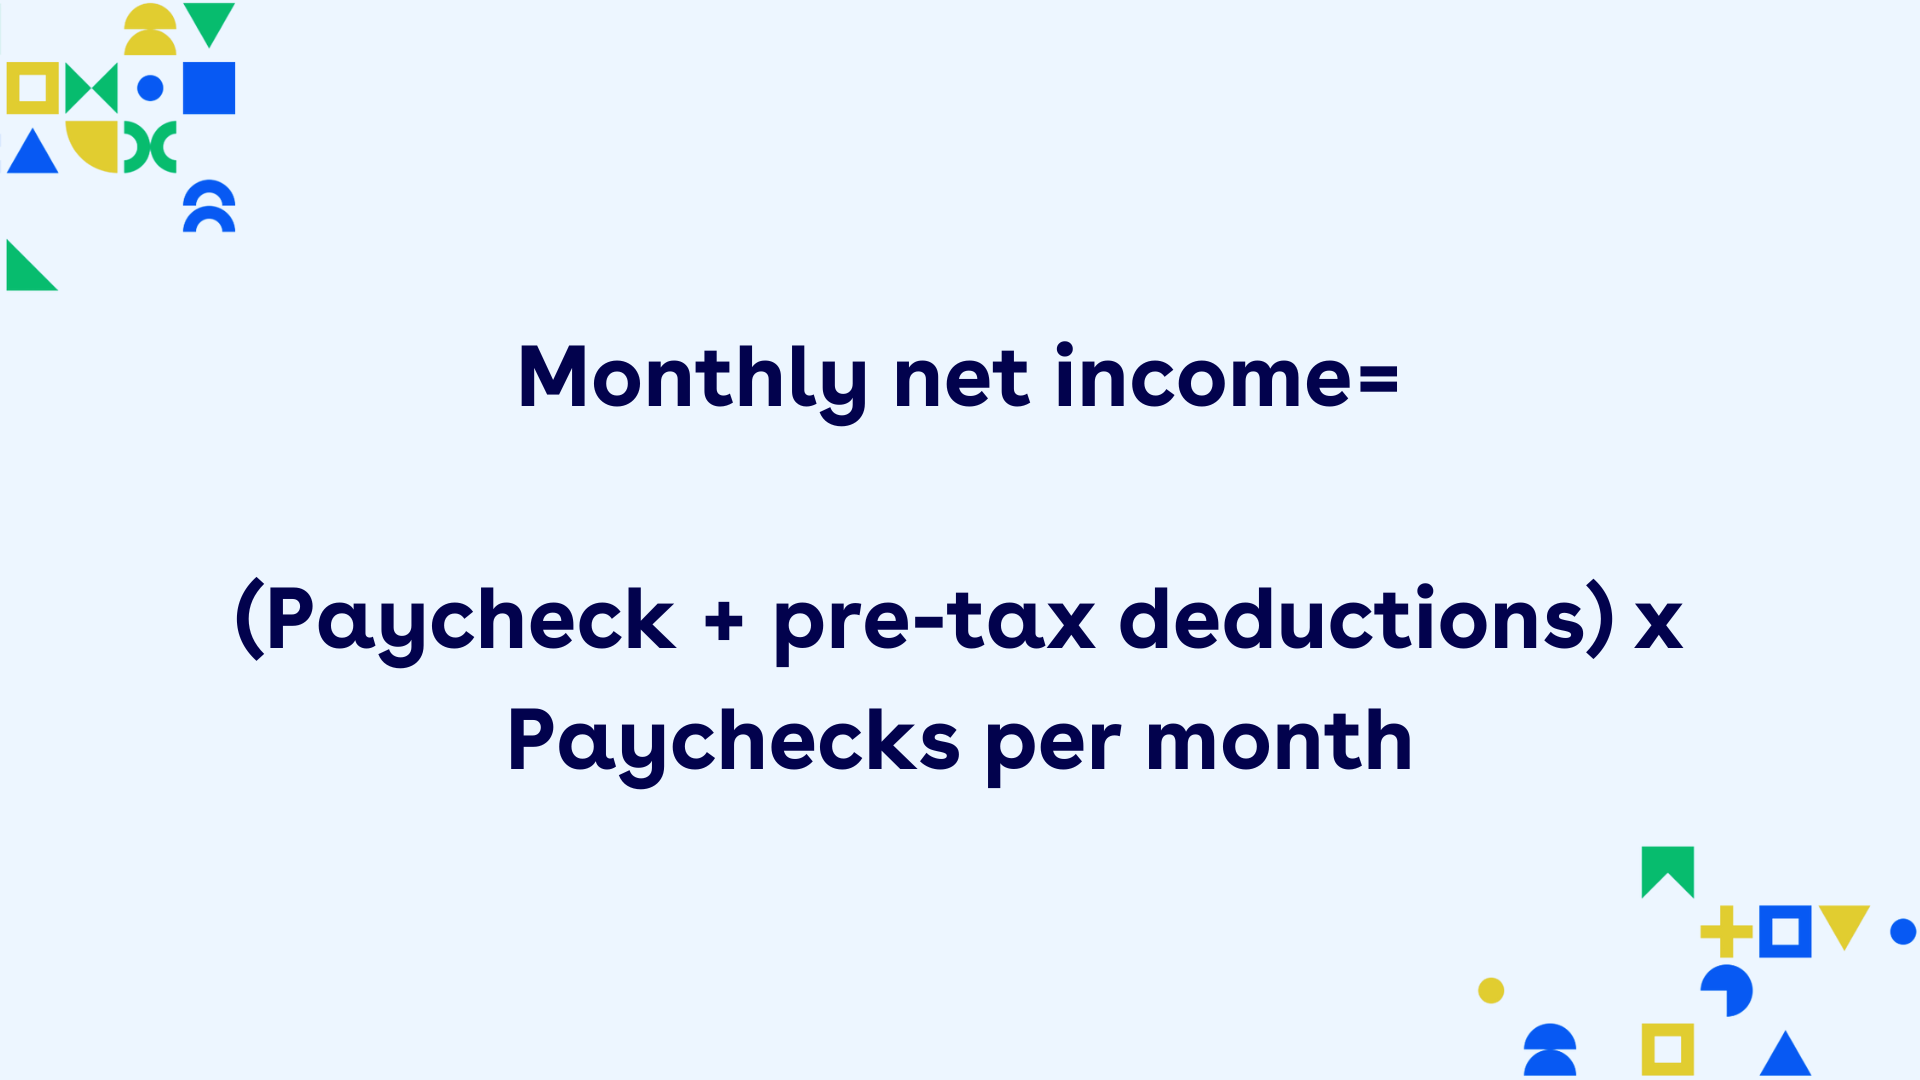 Visualization of the equation monthly net income = (Paycheck + pre-tax deductions) x Paychecks per month)